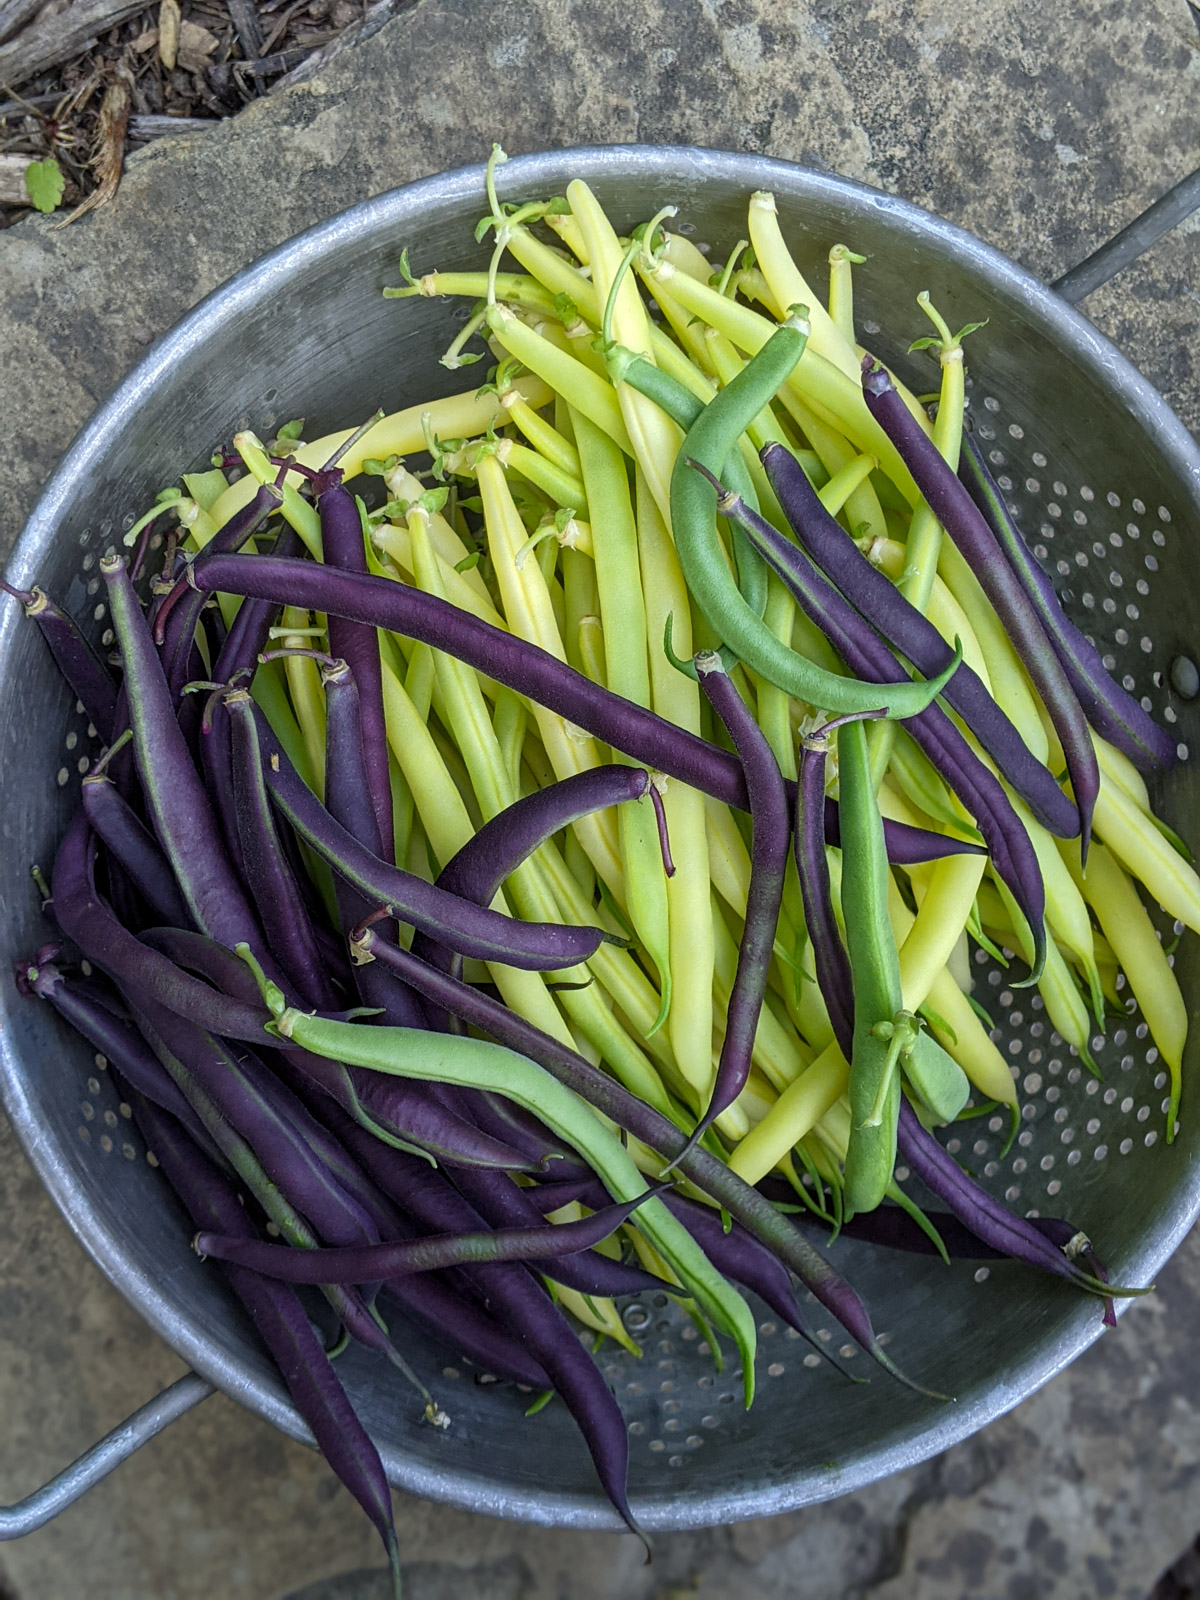 A colander full of purple, yellow and green beans picked from the garden.